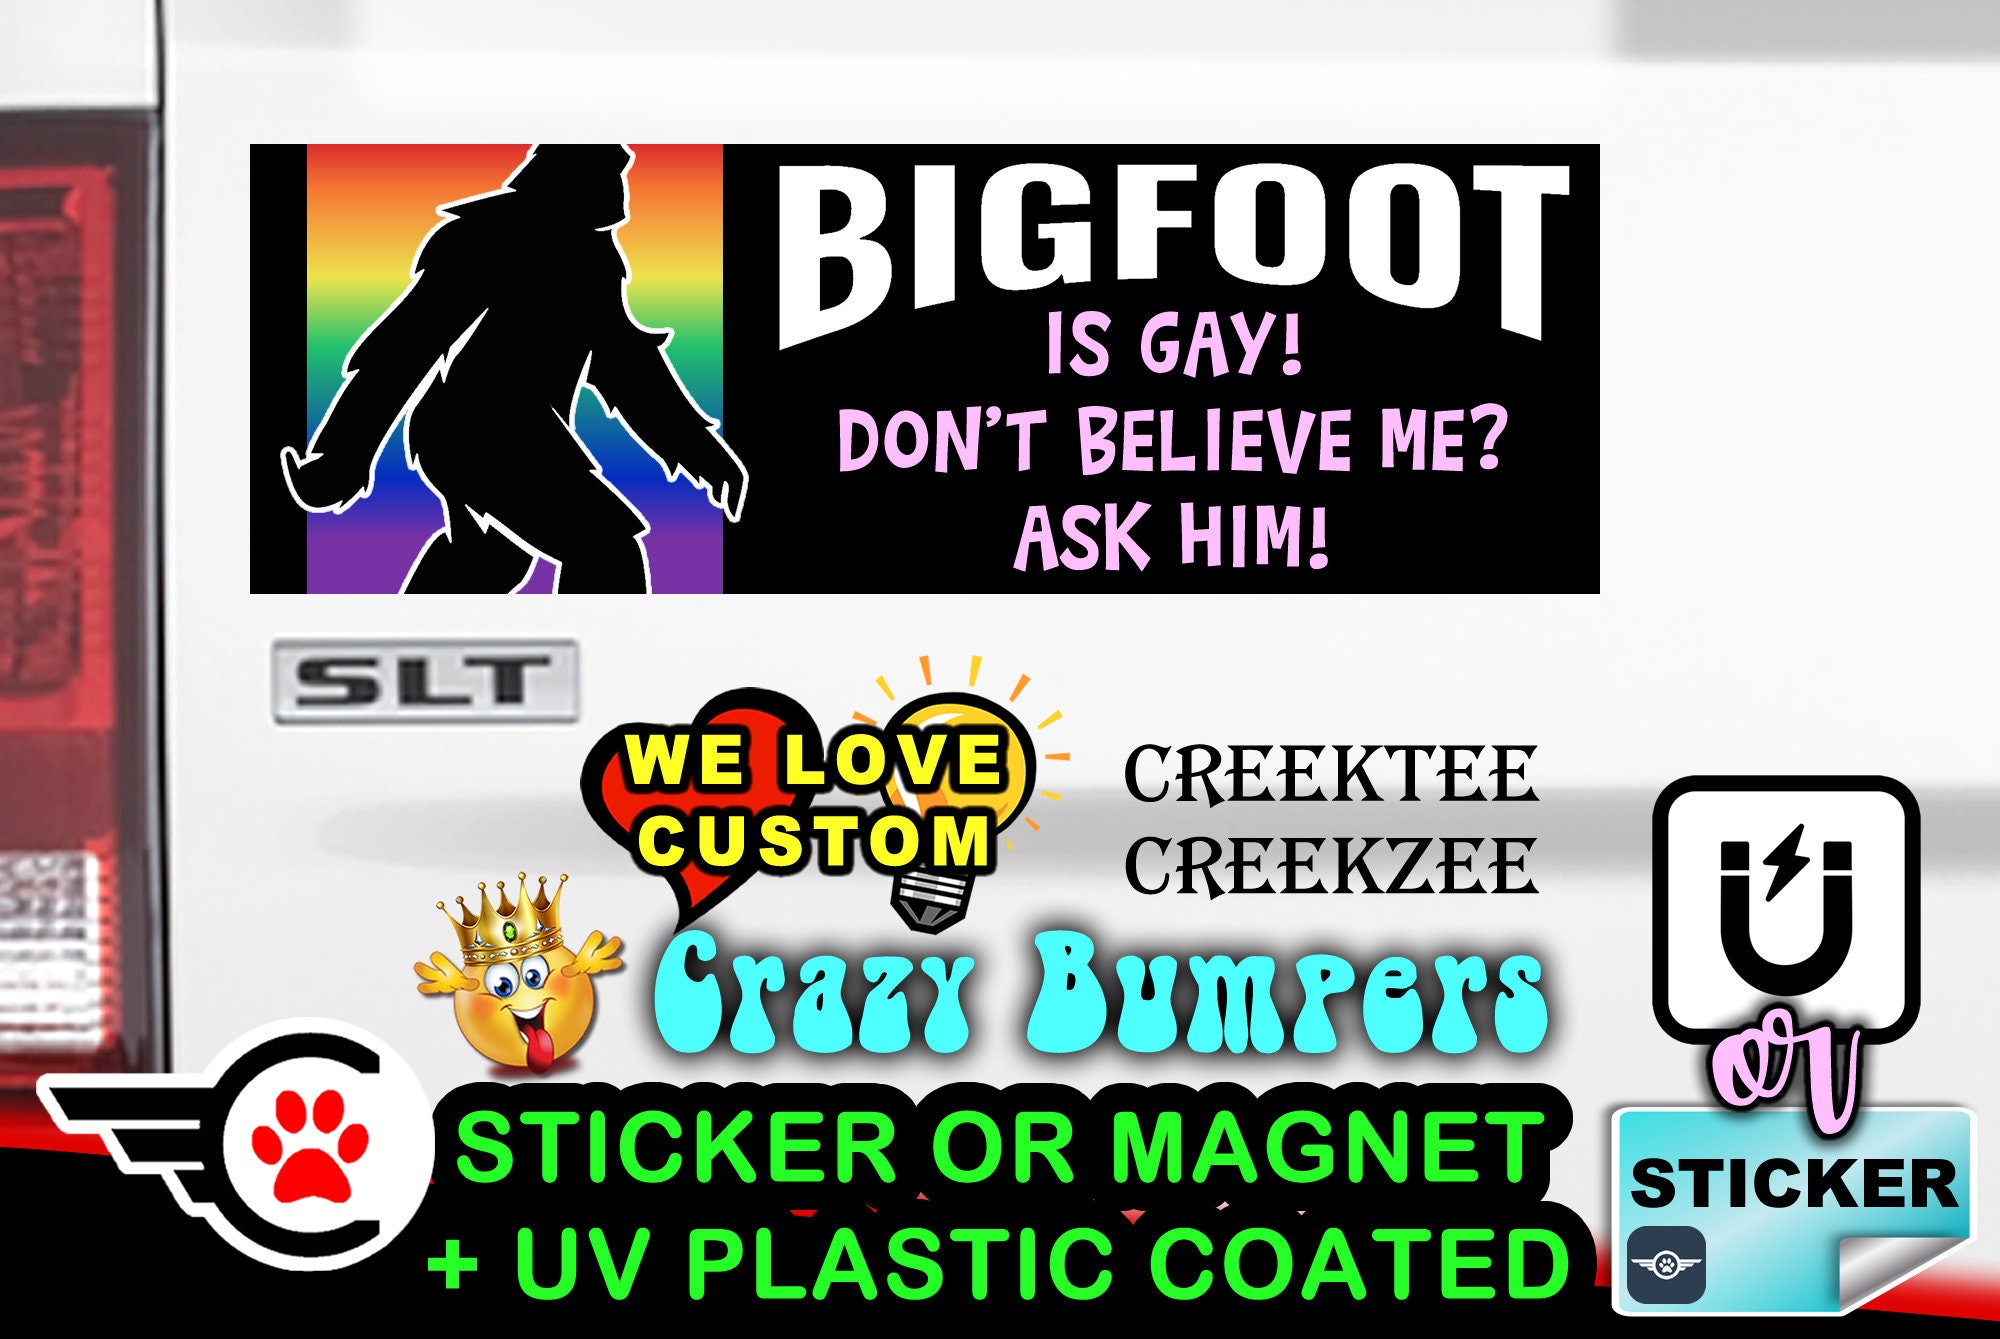 Bigfoot is Gay Don't Believe Me Ask Him! - Funny Bumper Sticker or Magnet 9